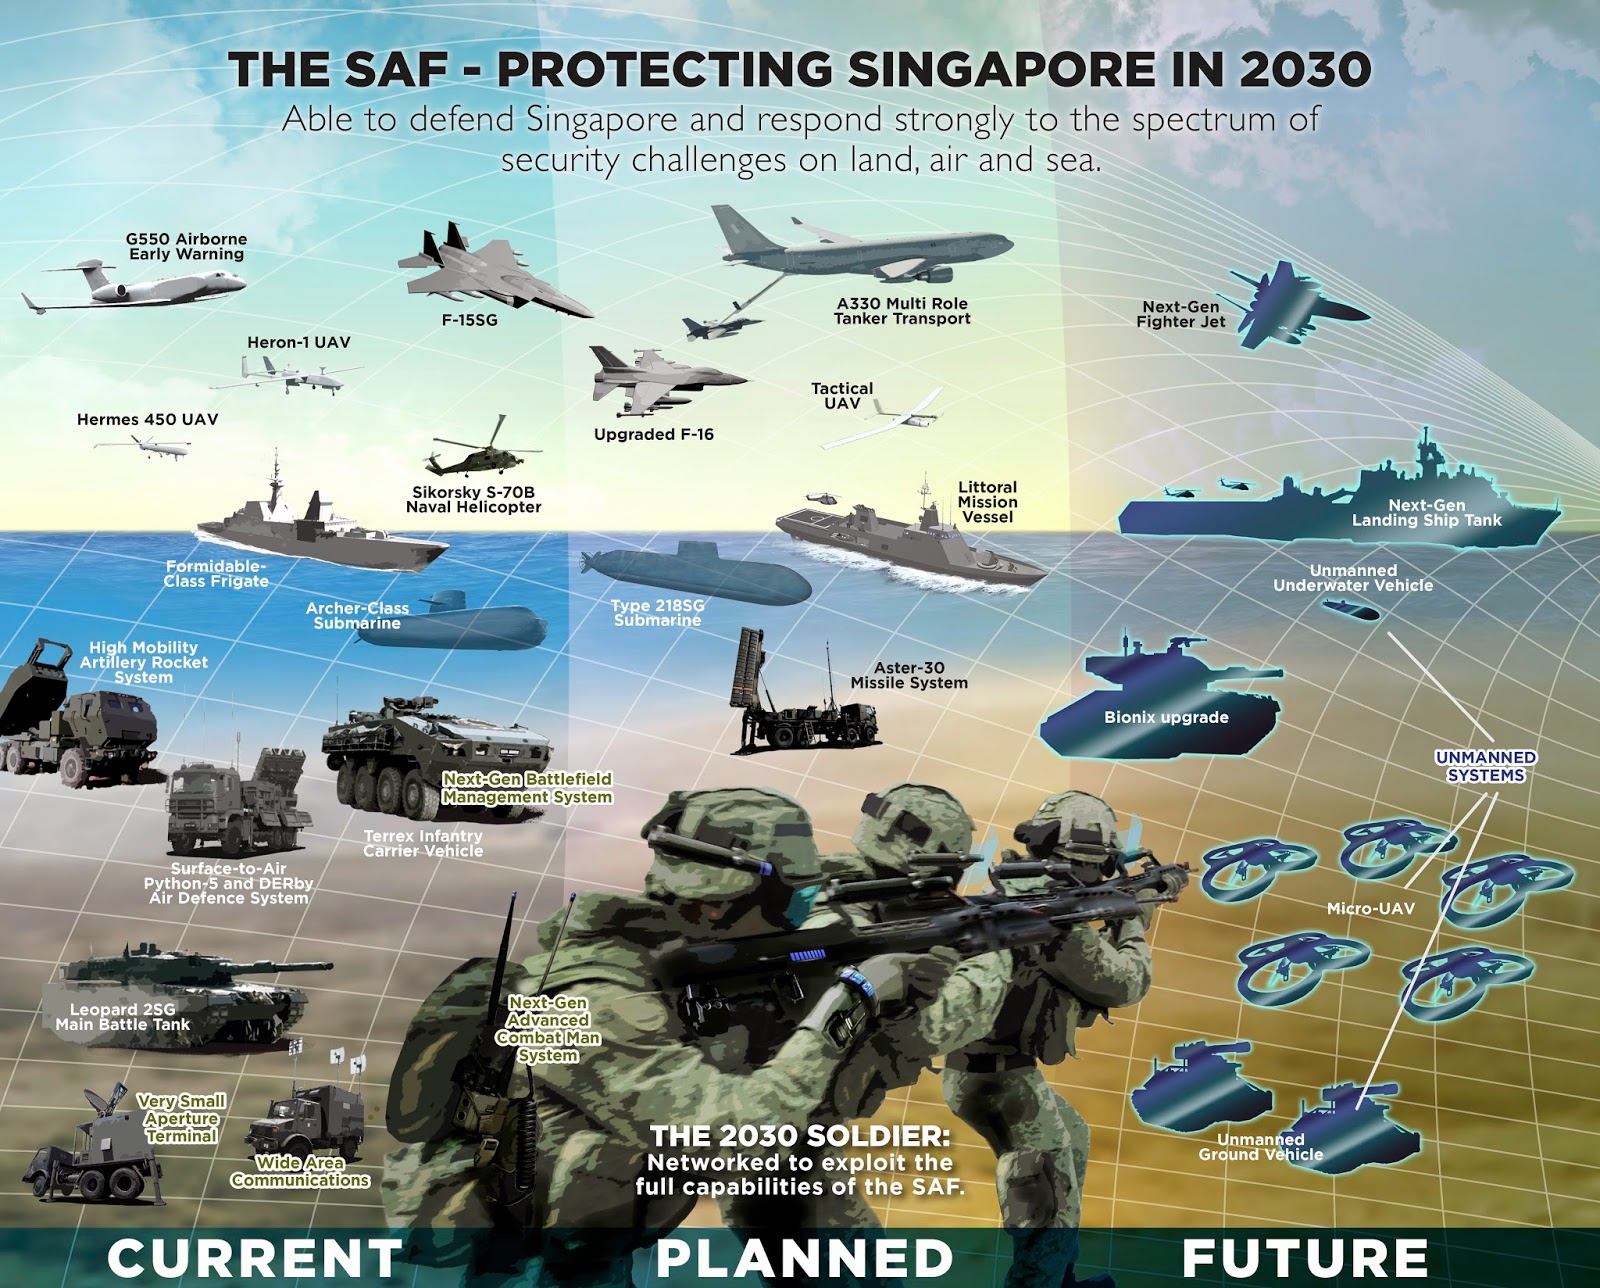 Steady+defence+spending+will+continue+-+2014+Singapore+Defence+Budget.jpg